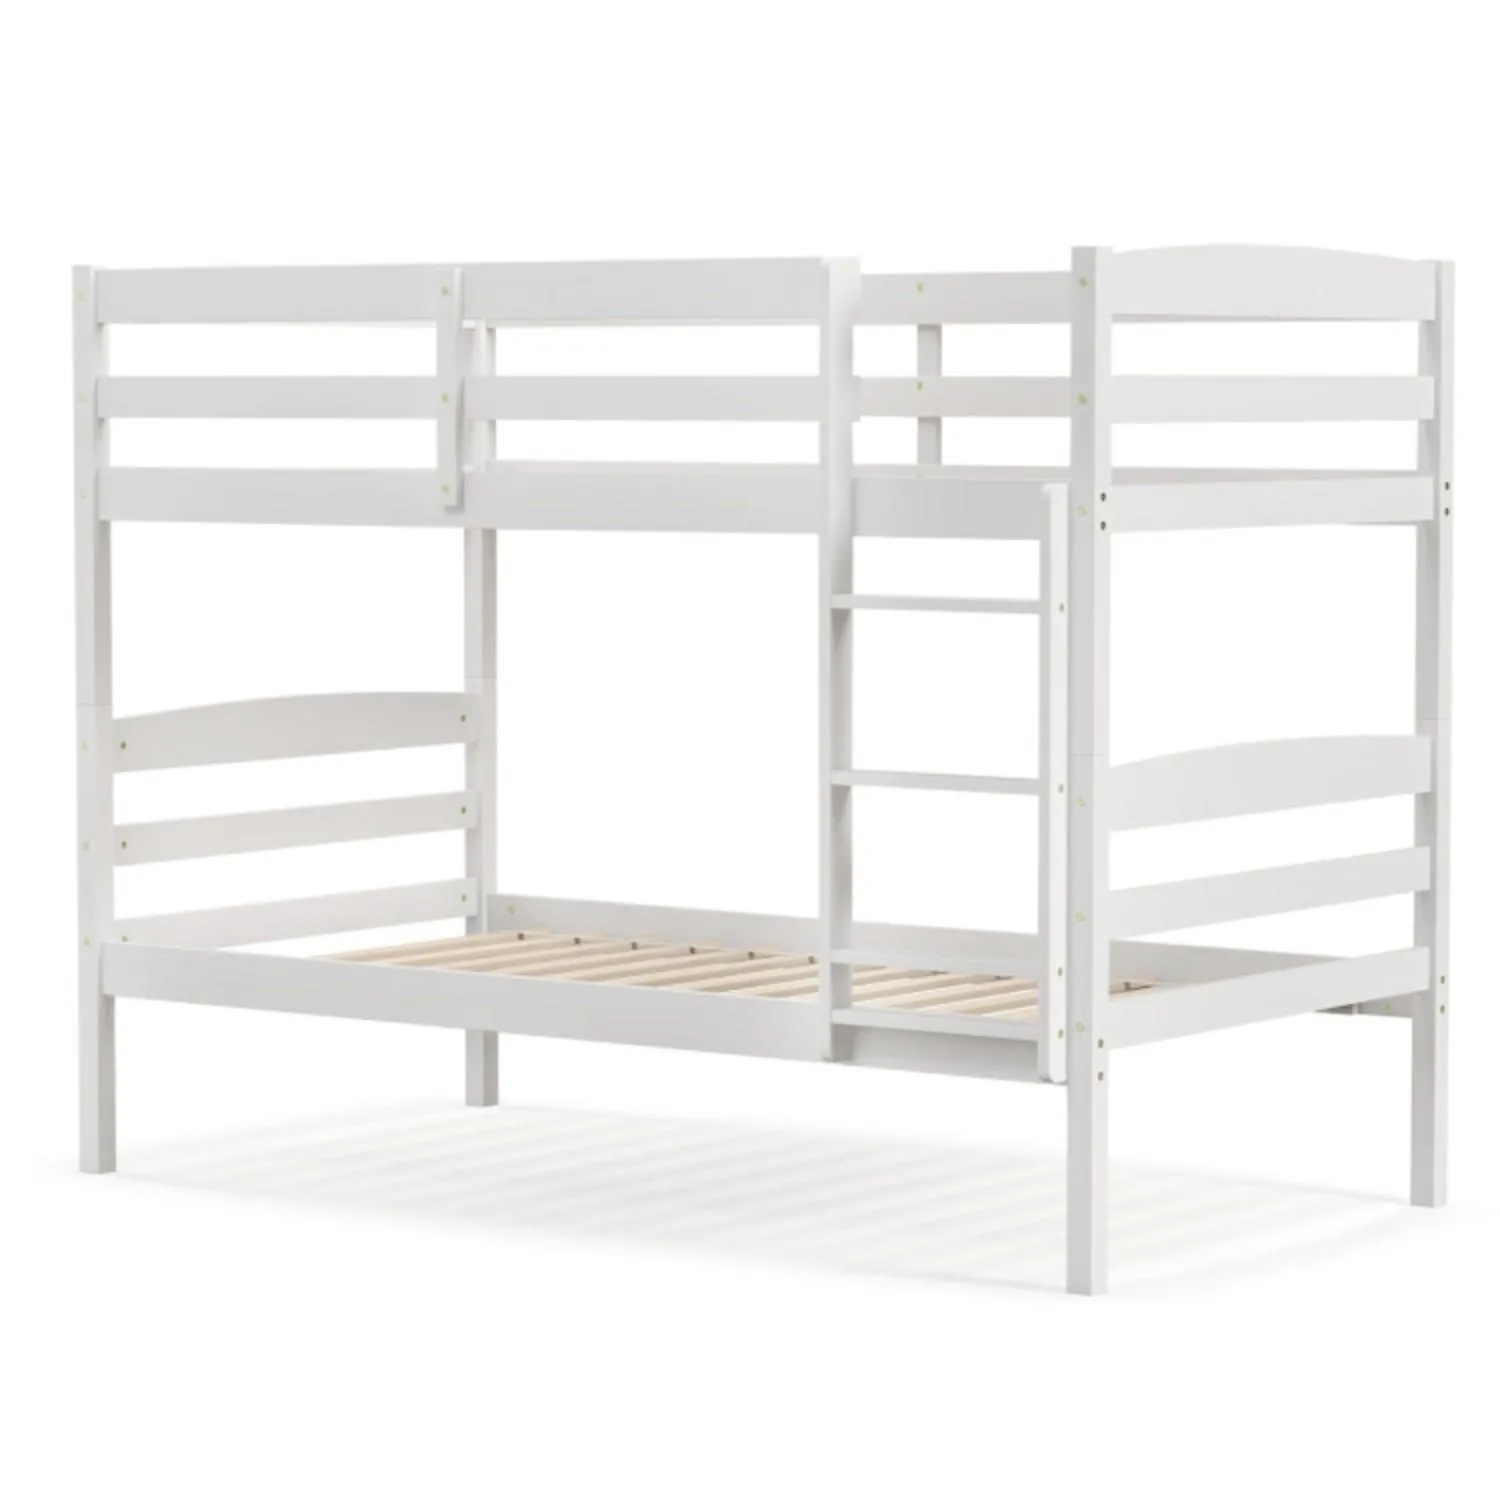 Hivvago Solid Wood Twin Over Twin Bunk Bed Frame with High Guardrails and Integrated Ladder